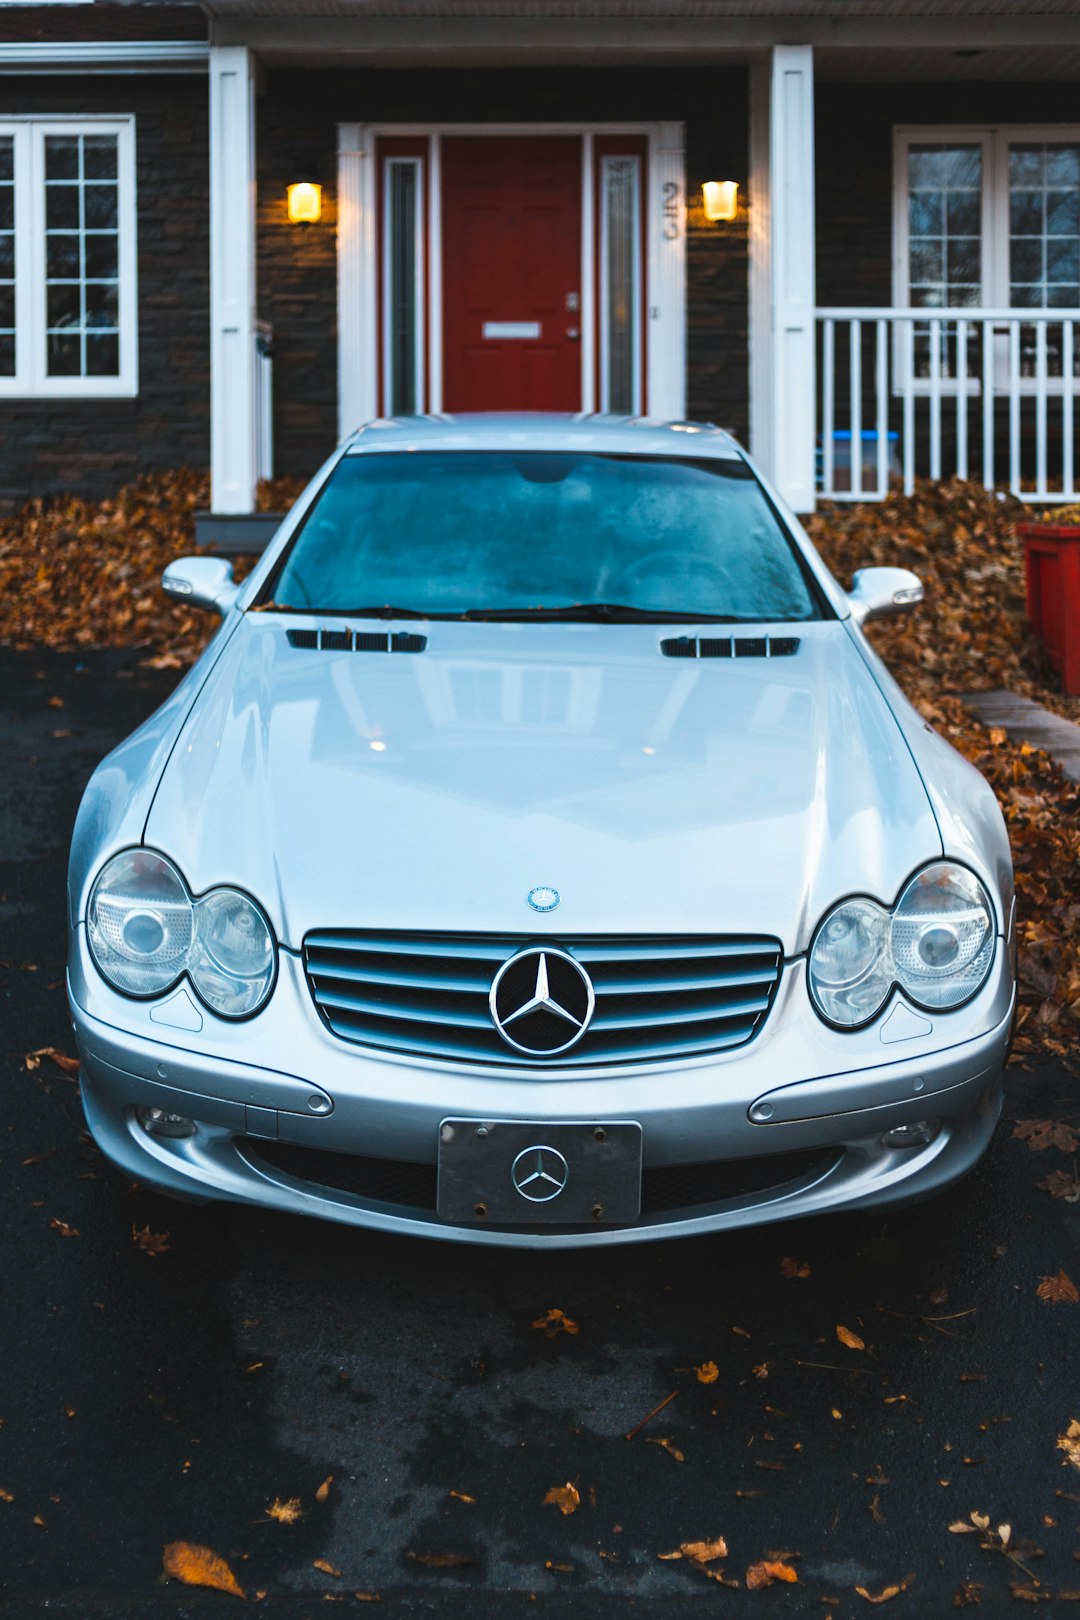 silver Mercedes-Benz park in front of the house